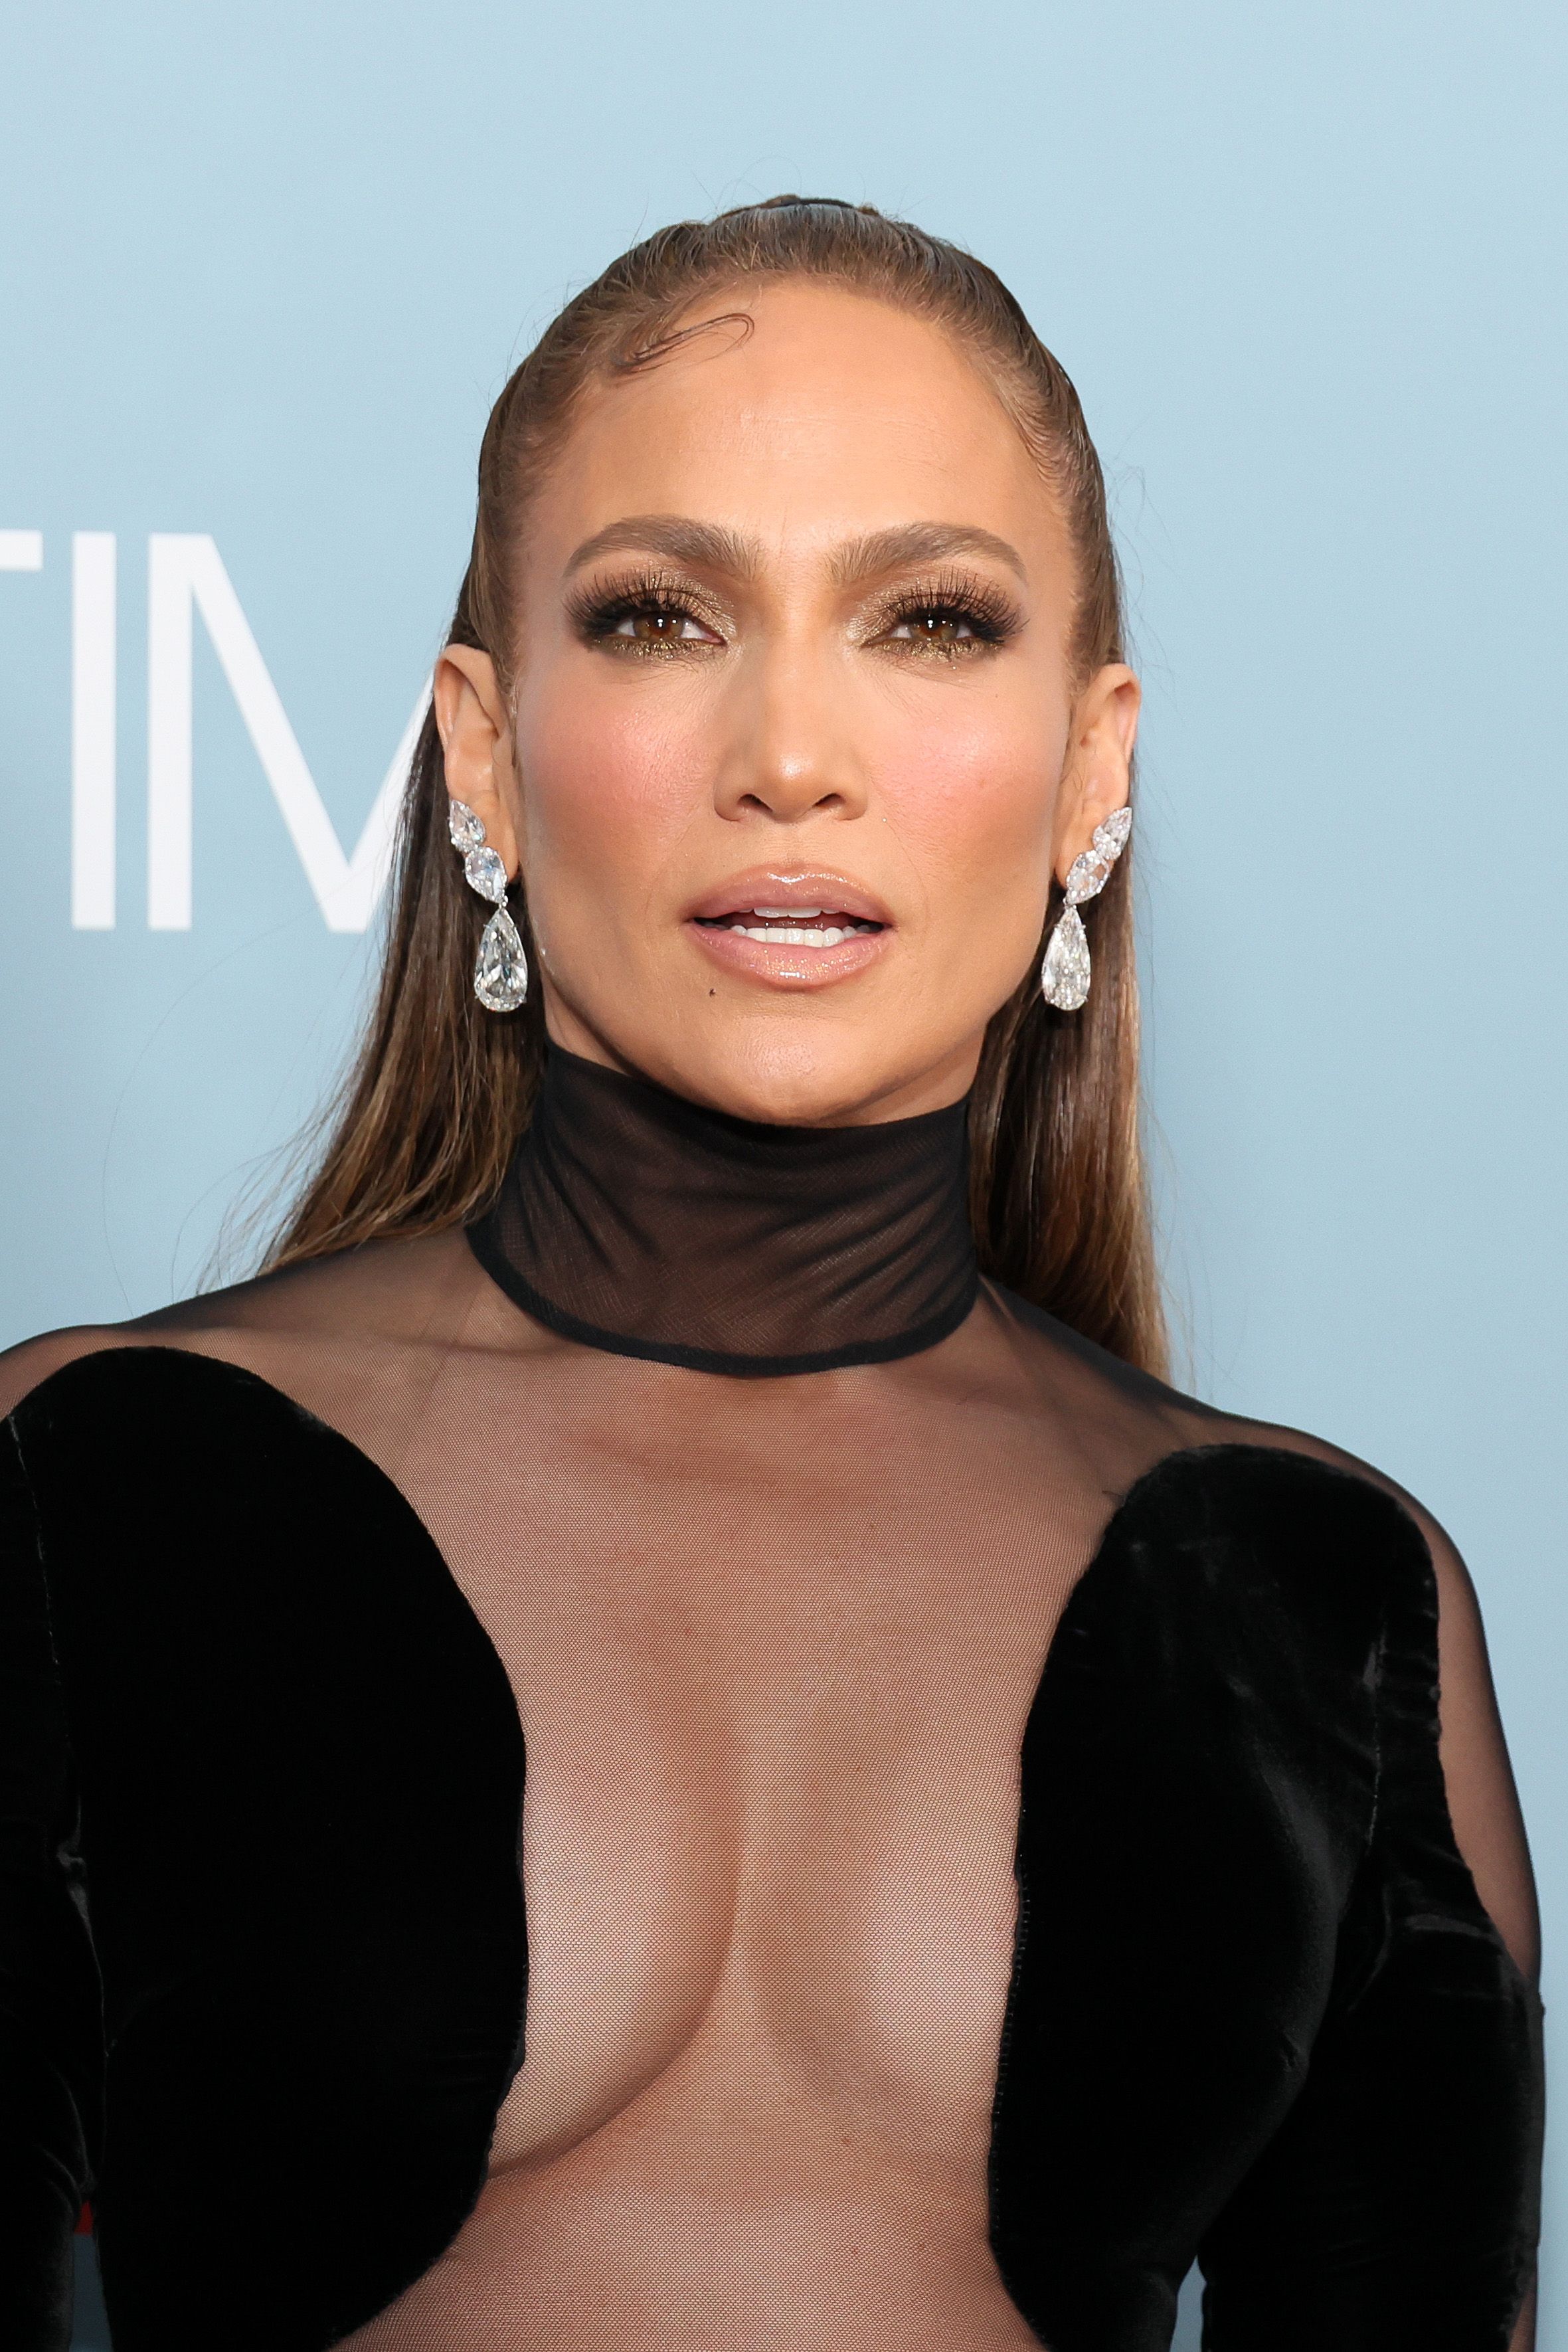 Jennifer Lopez looks different with strawberry blonde hair pic